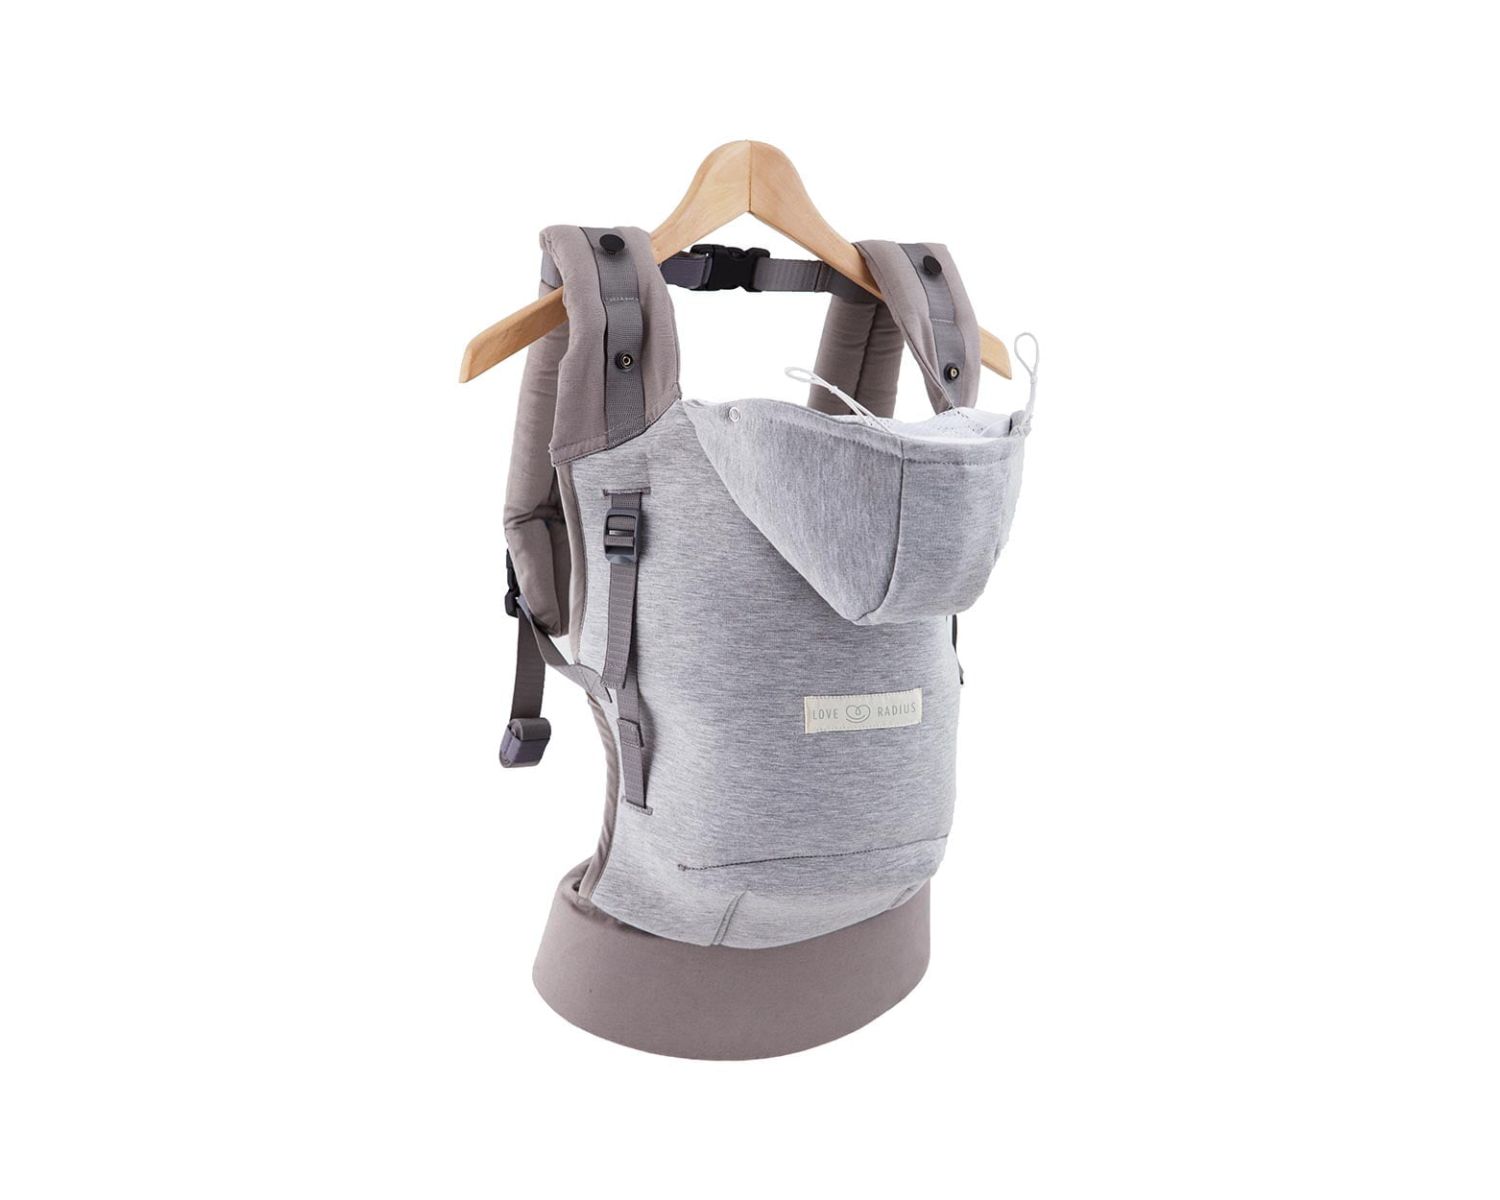 Baby Carrier Hoodie Review: The Perfect Blend of Comfort and Functionality